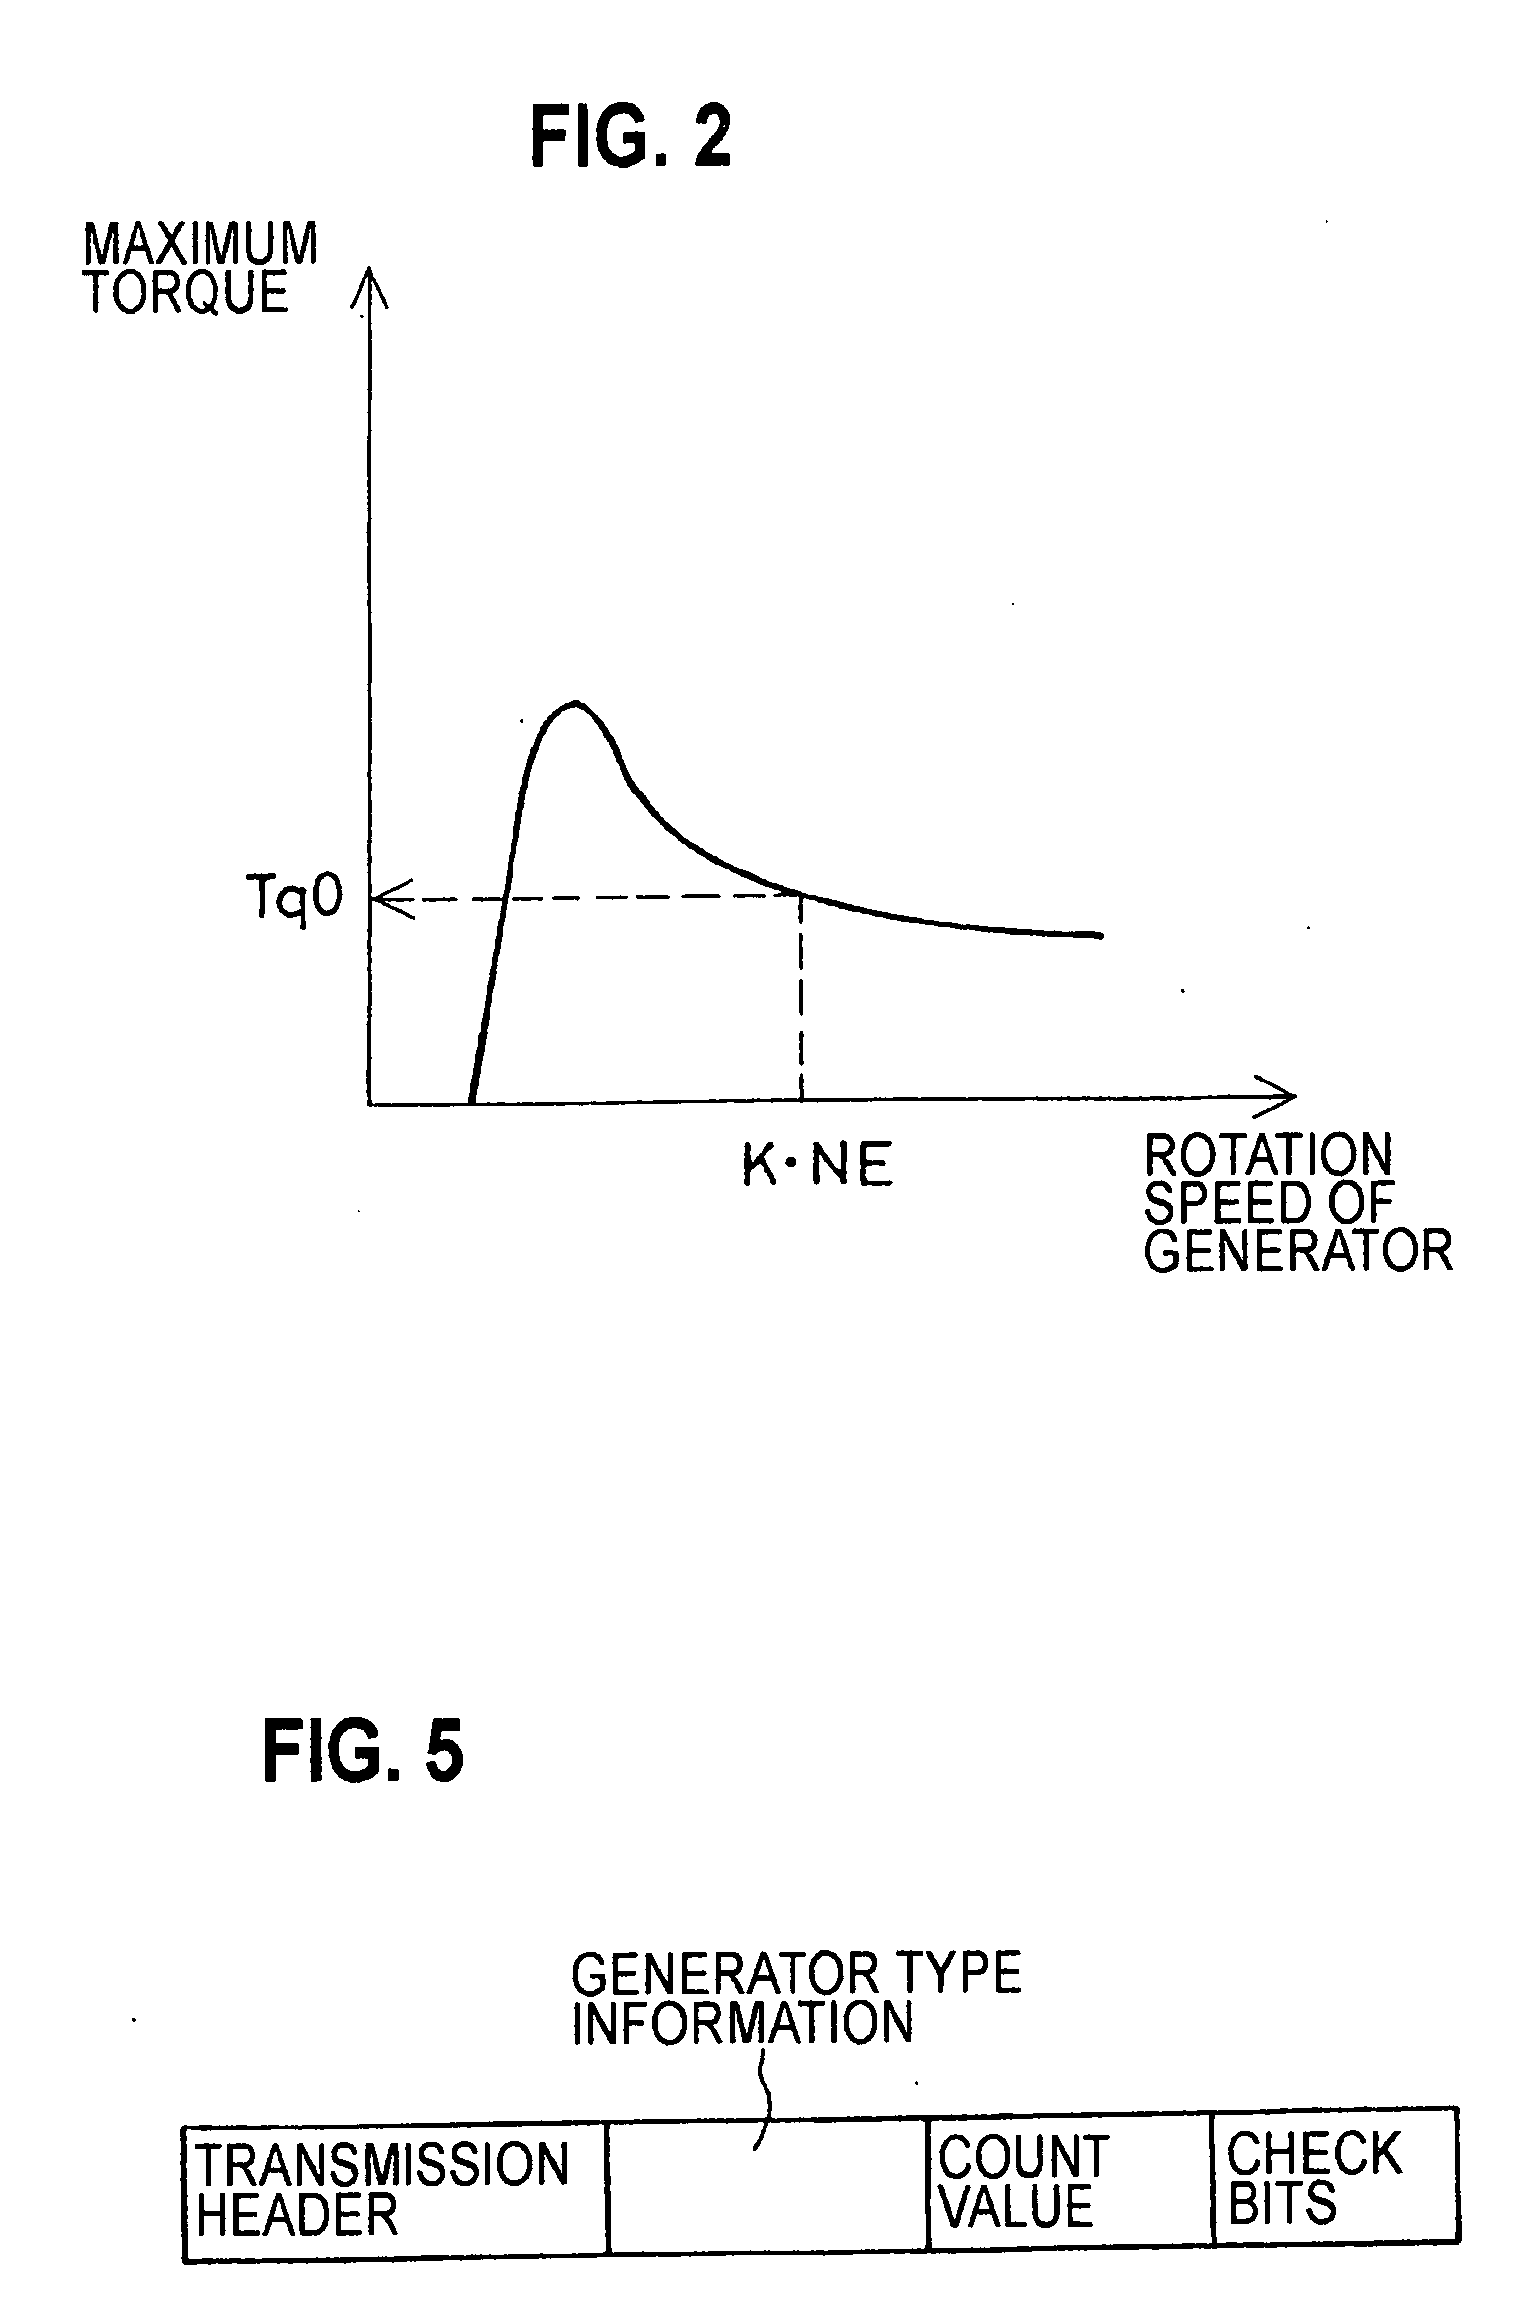 Control apparatus for electrical generator of motor vehicle